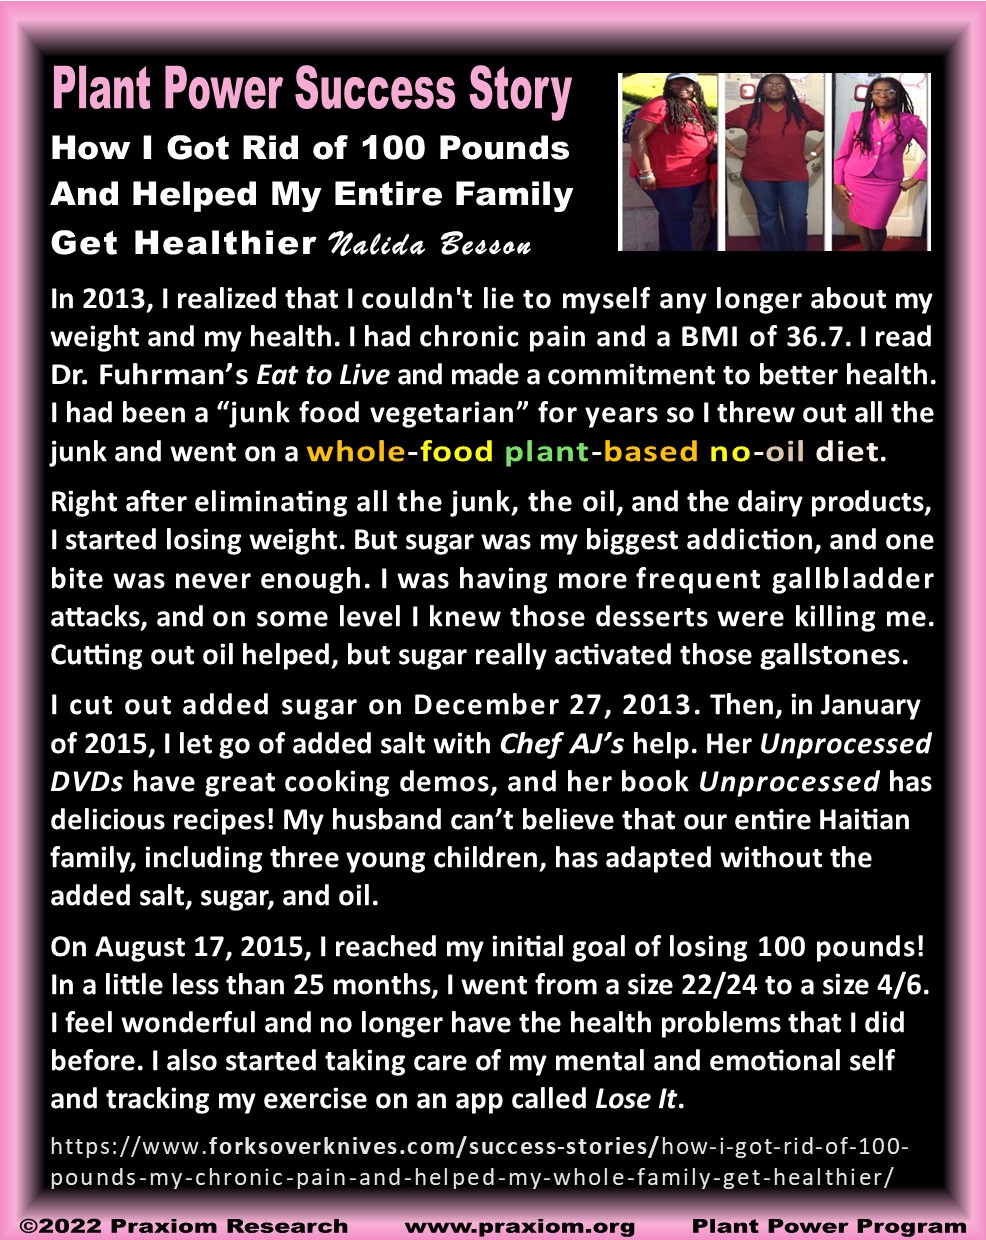 How I Got Rid of 100 Pounds And Helped My Entire Family Get Healthier Nalida Besson